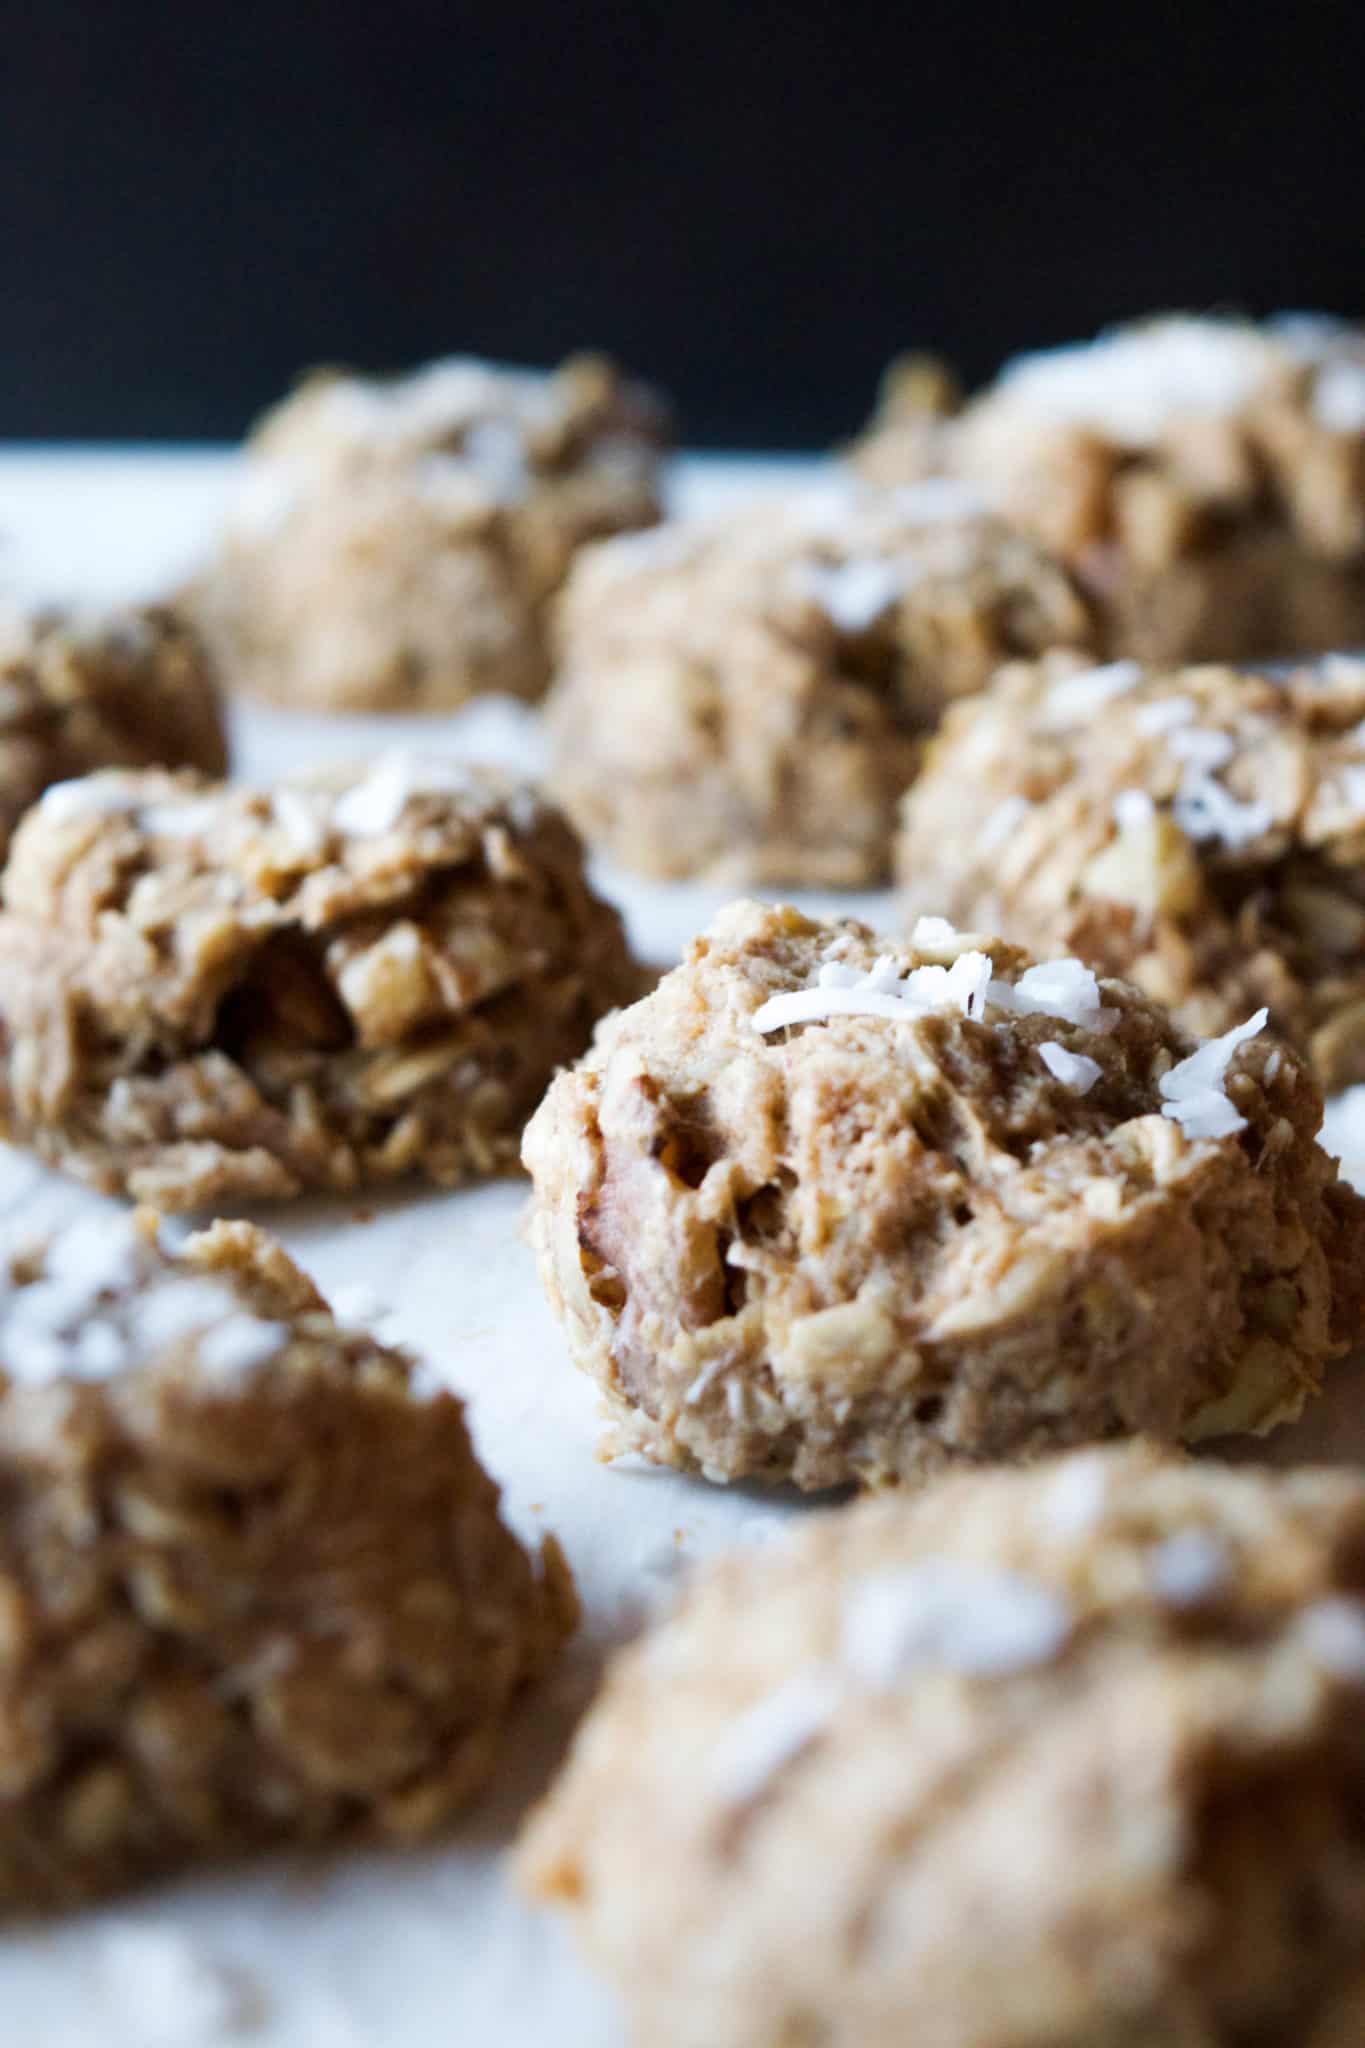 Filling, healthy, delicious - everything you could want for breakfast! Make a big batch of these healthy breakfast cookies and have breakfast ready to go all week long. #recipe #breakfastcookies